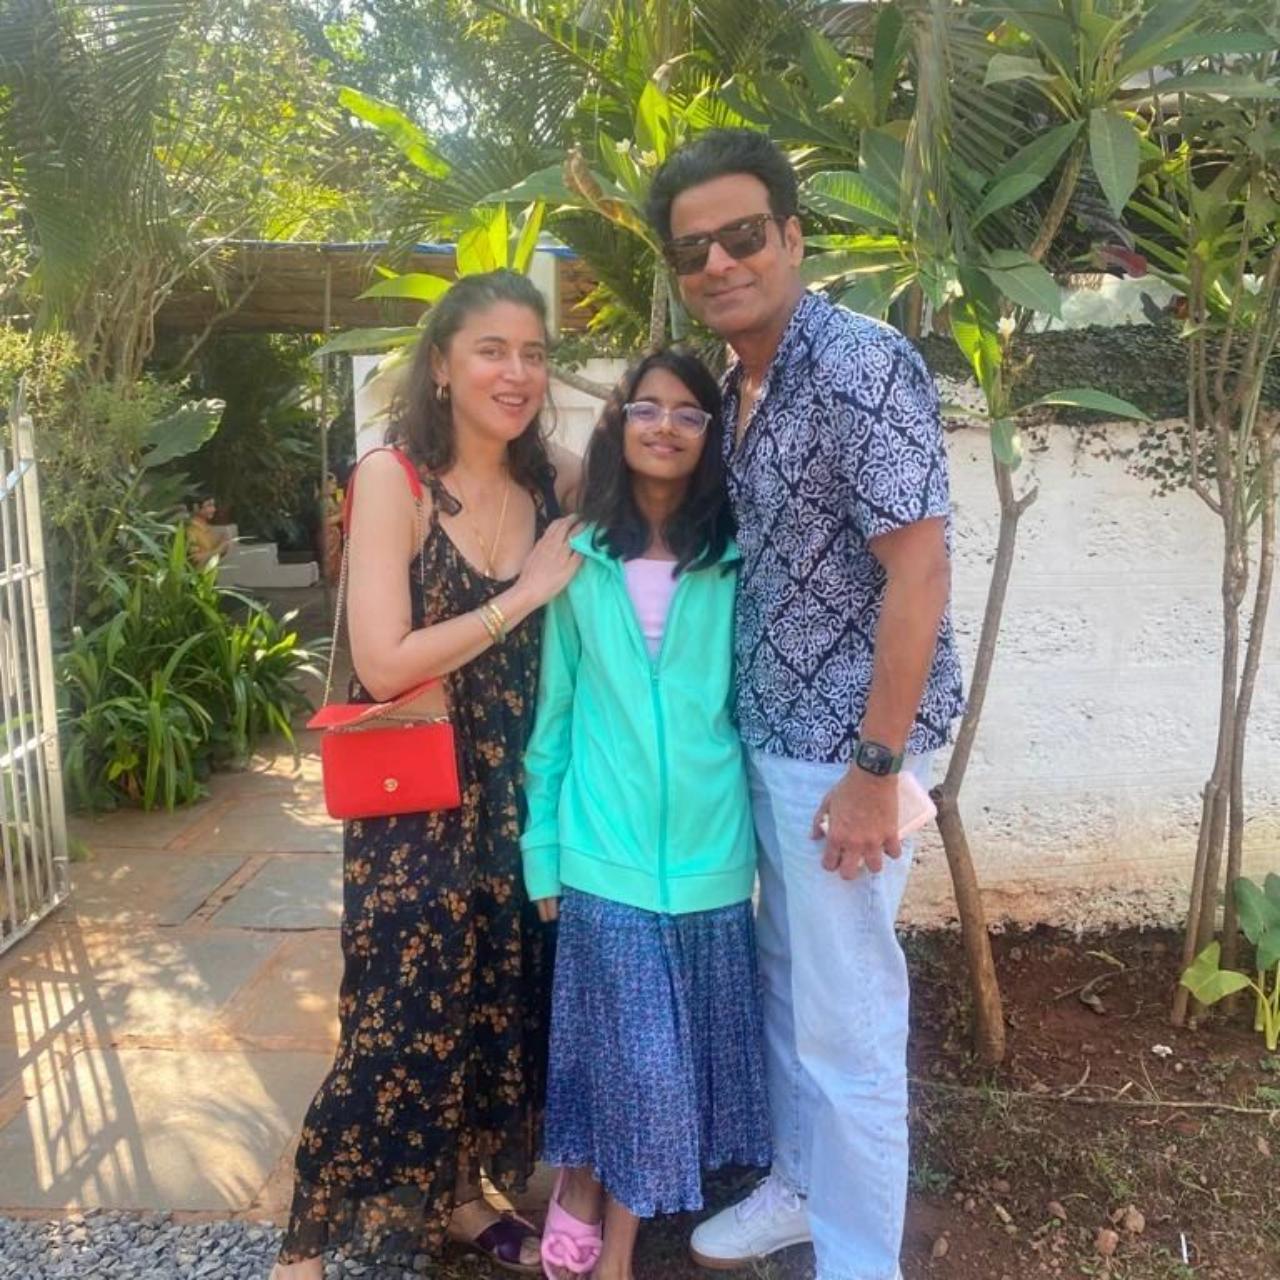 Actor Manoj Bajpayee is usually quite private when it comes to his family. His daughter has also been away from the limelight. However, recently, the actor took to his Instagram handle to share a couple of pictures form his family vacation